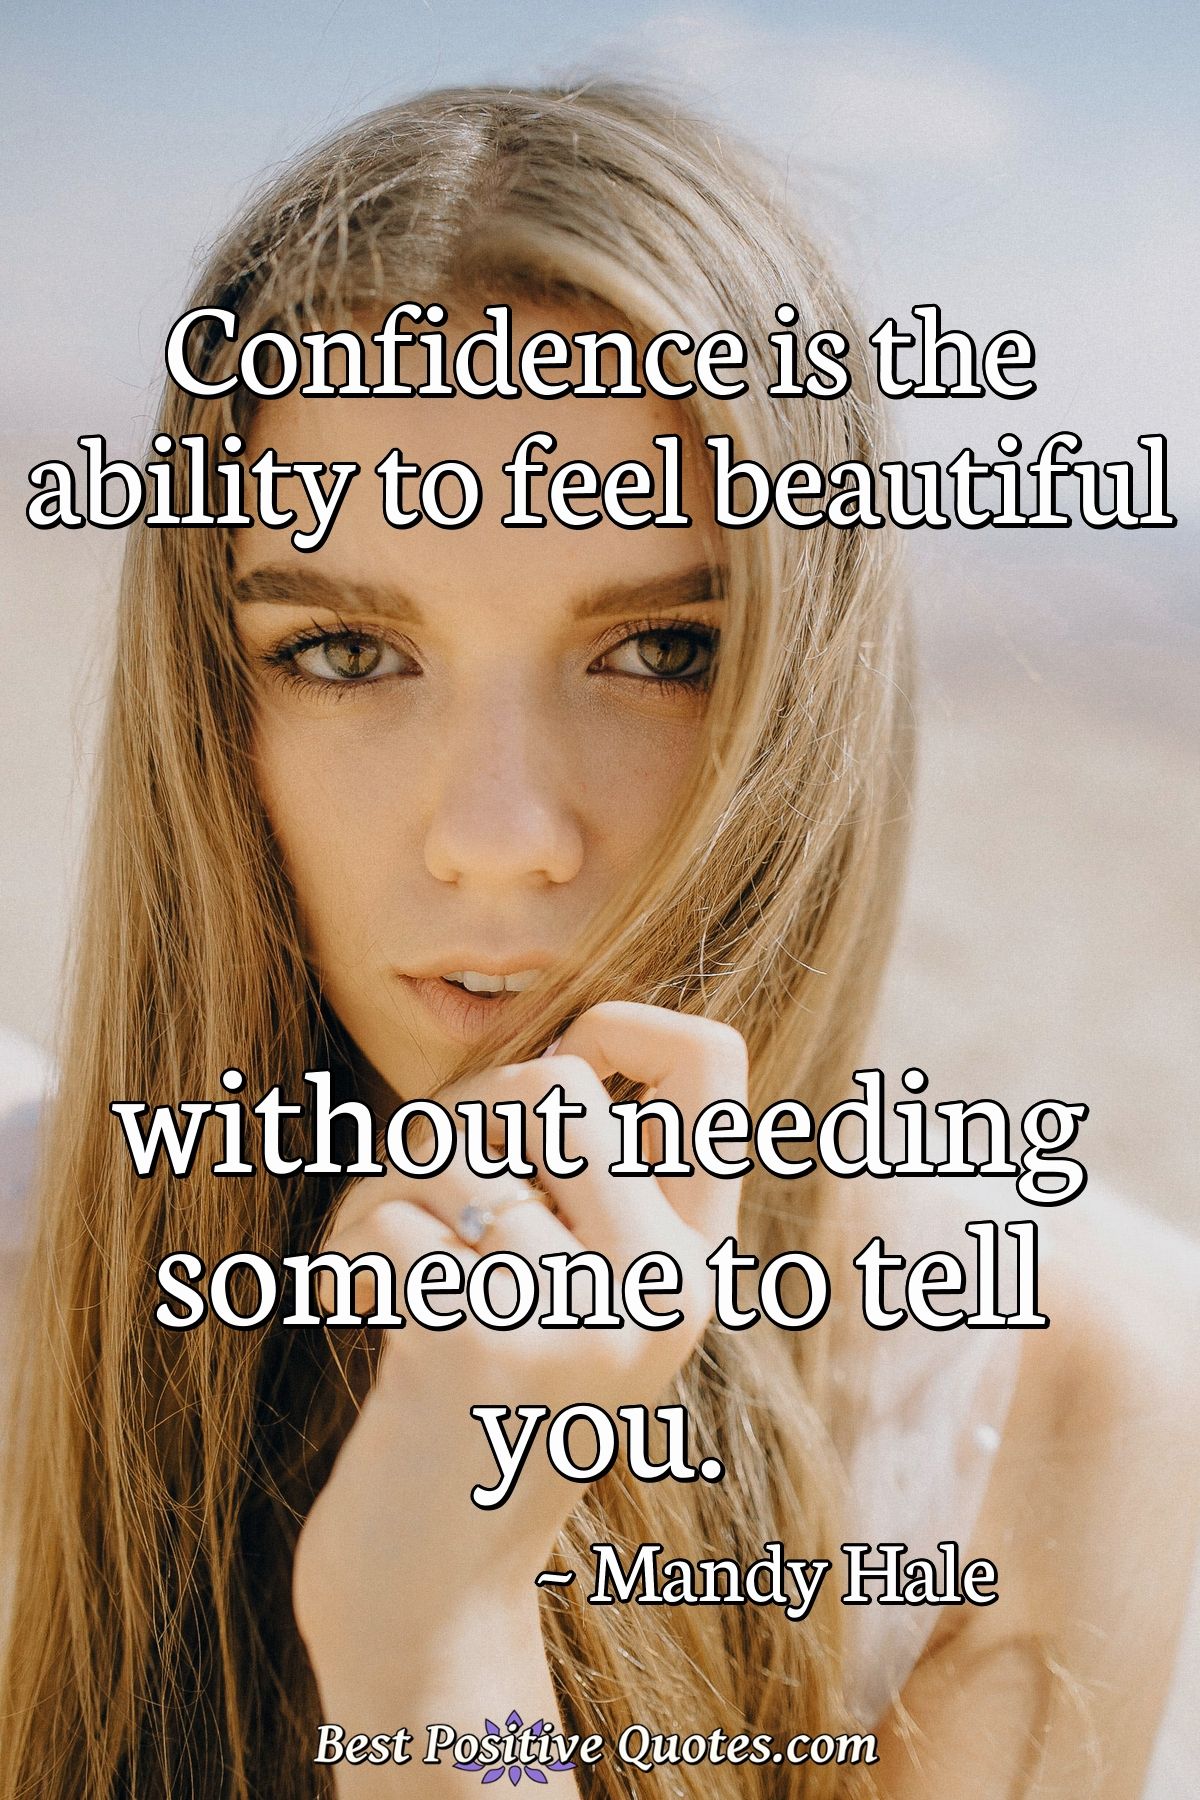 Confidence is the ability to feel beautiful without needing someone to tell you. - Mandy Hale